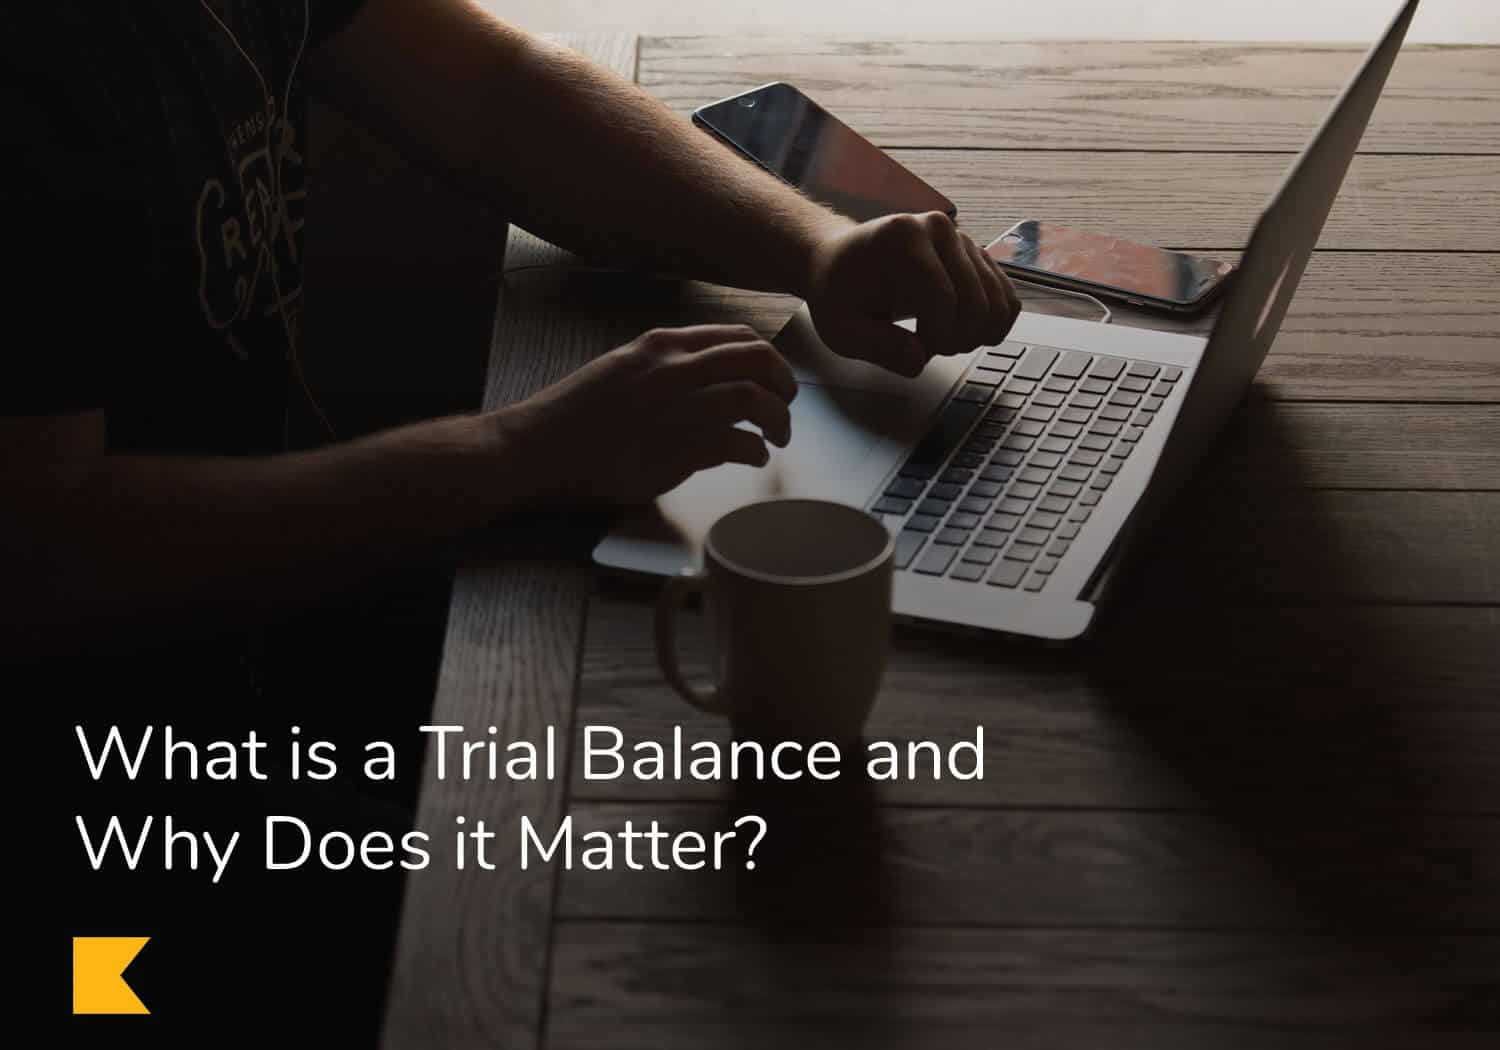 What is a Trial Balance and Why Does it Matter?